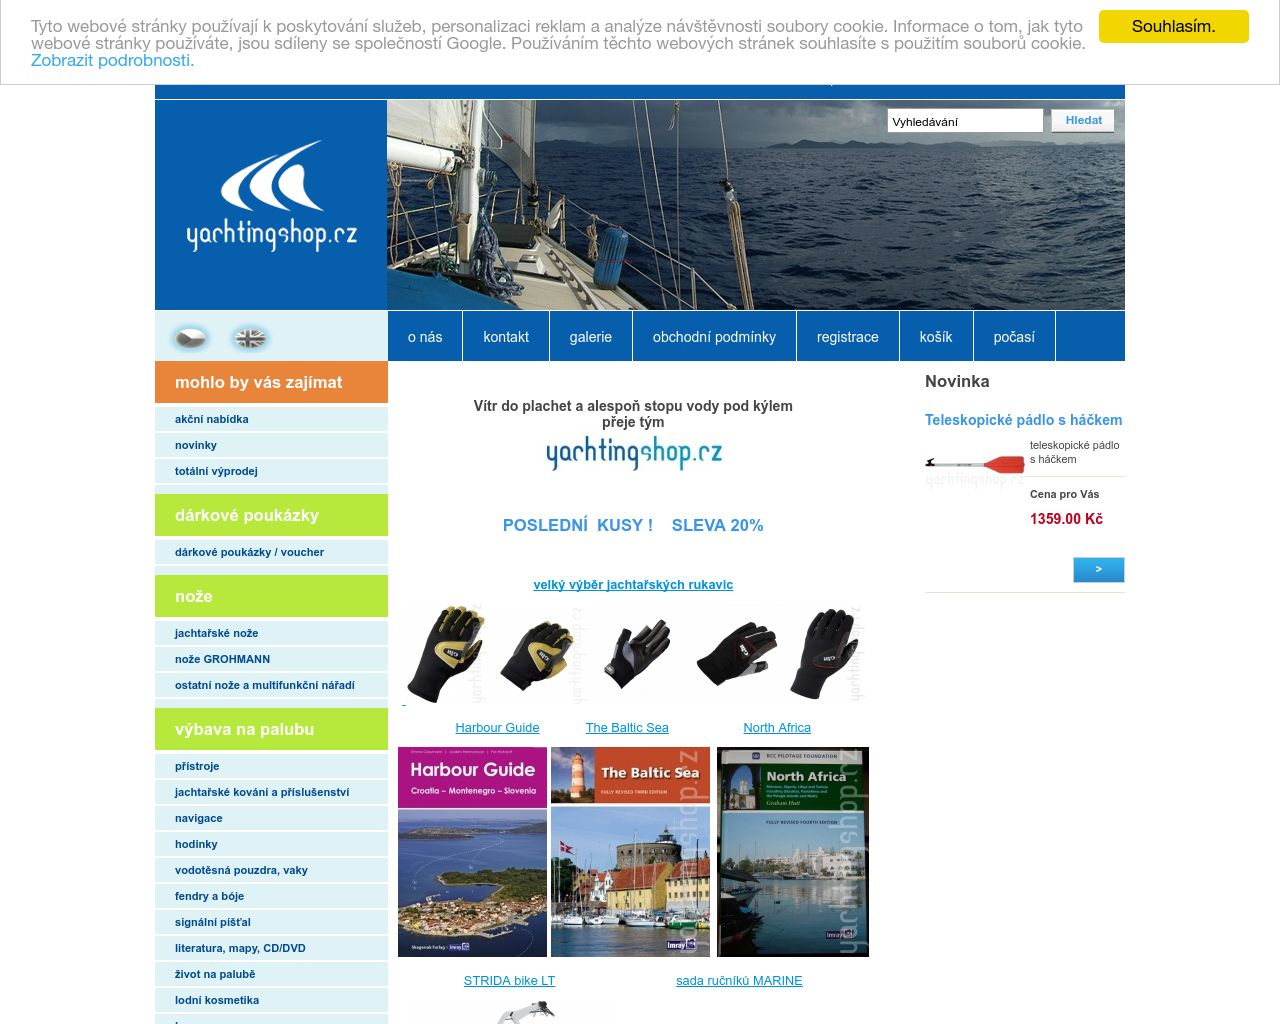 Site Image yachting-shop.cz v 1280x1024